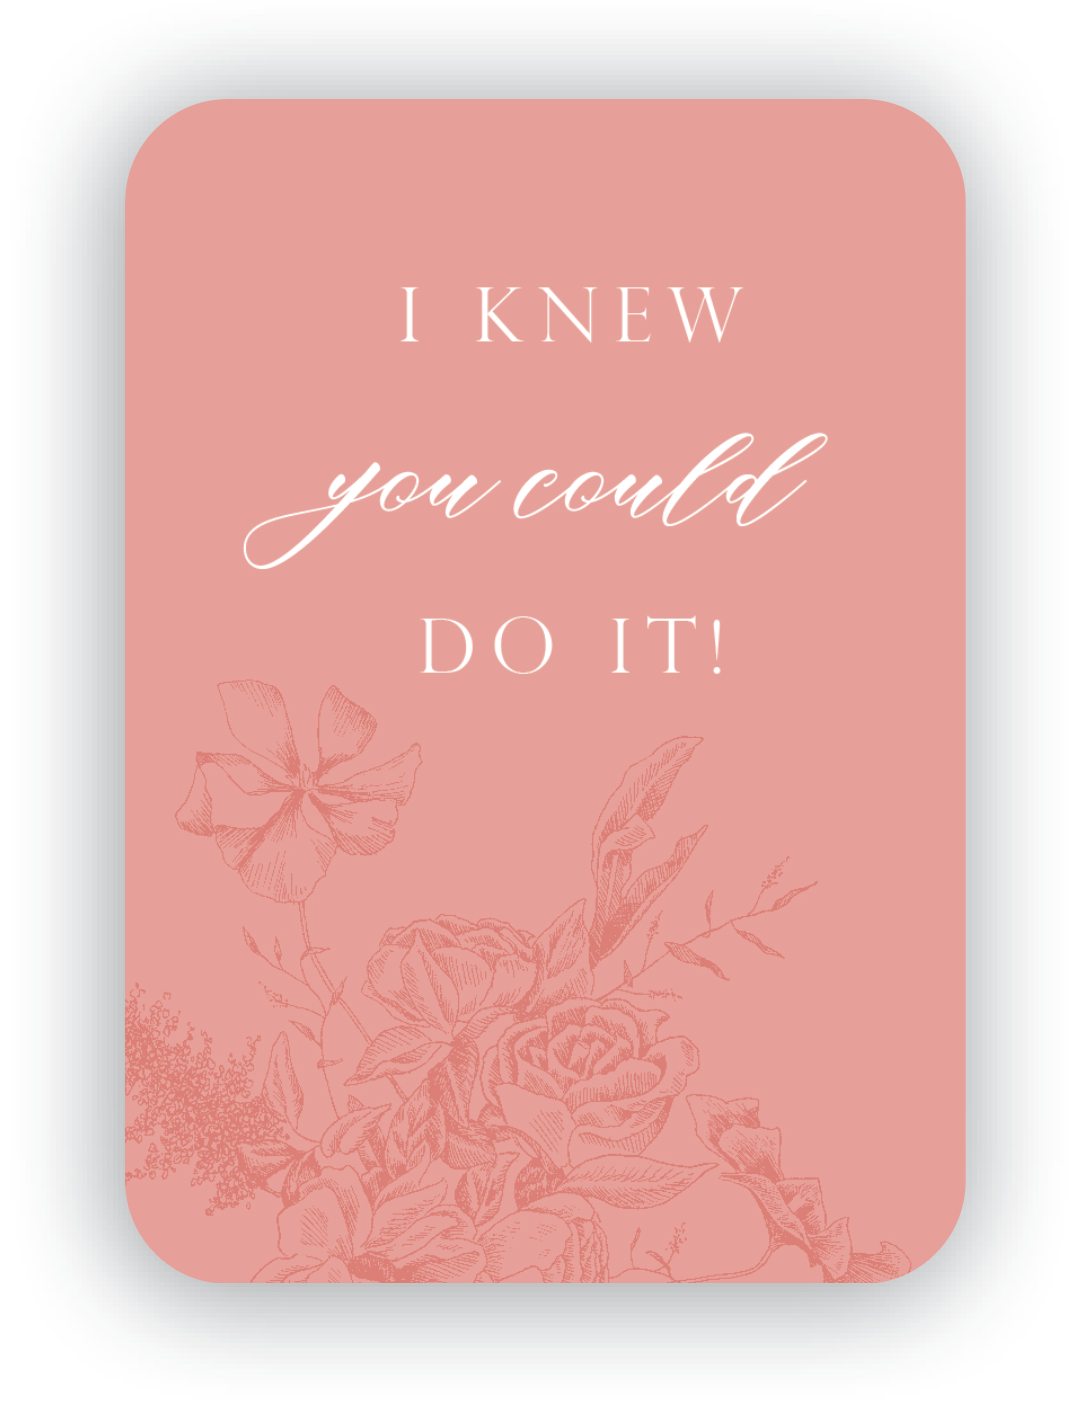 Digital coral mini card with florals that says "I knew you could do it!" by Rust Belt Love